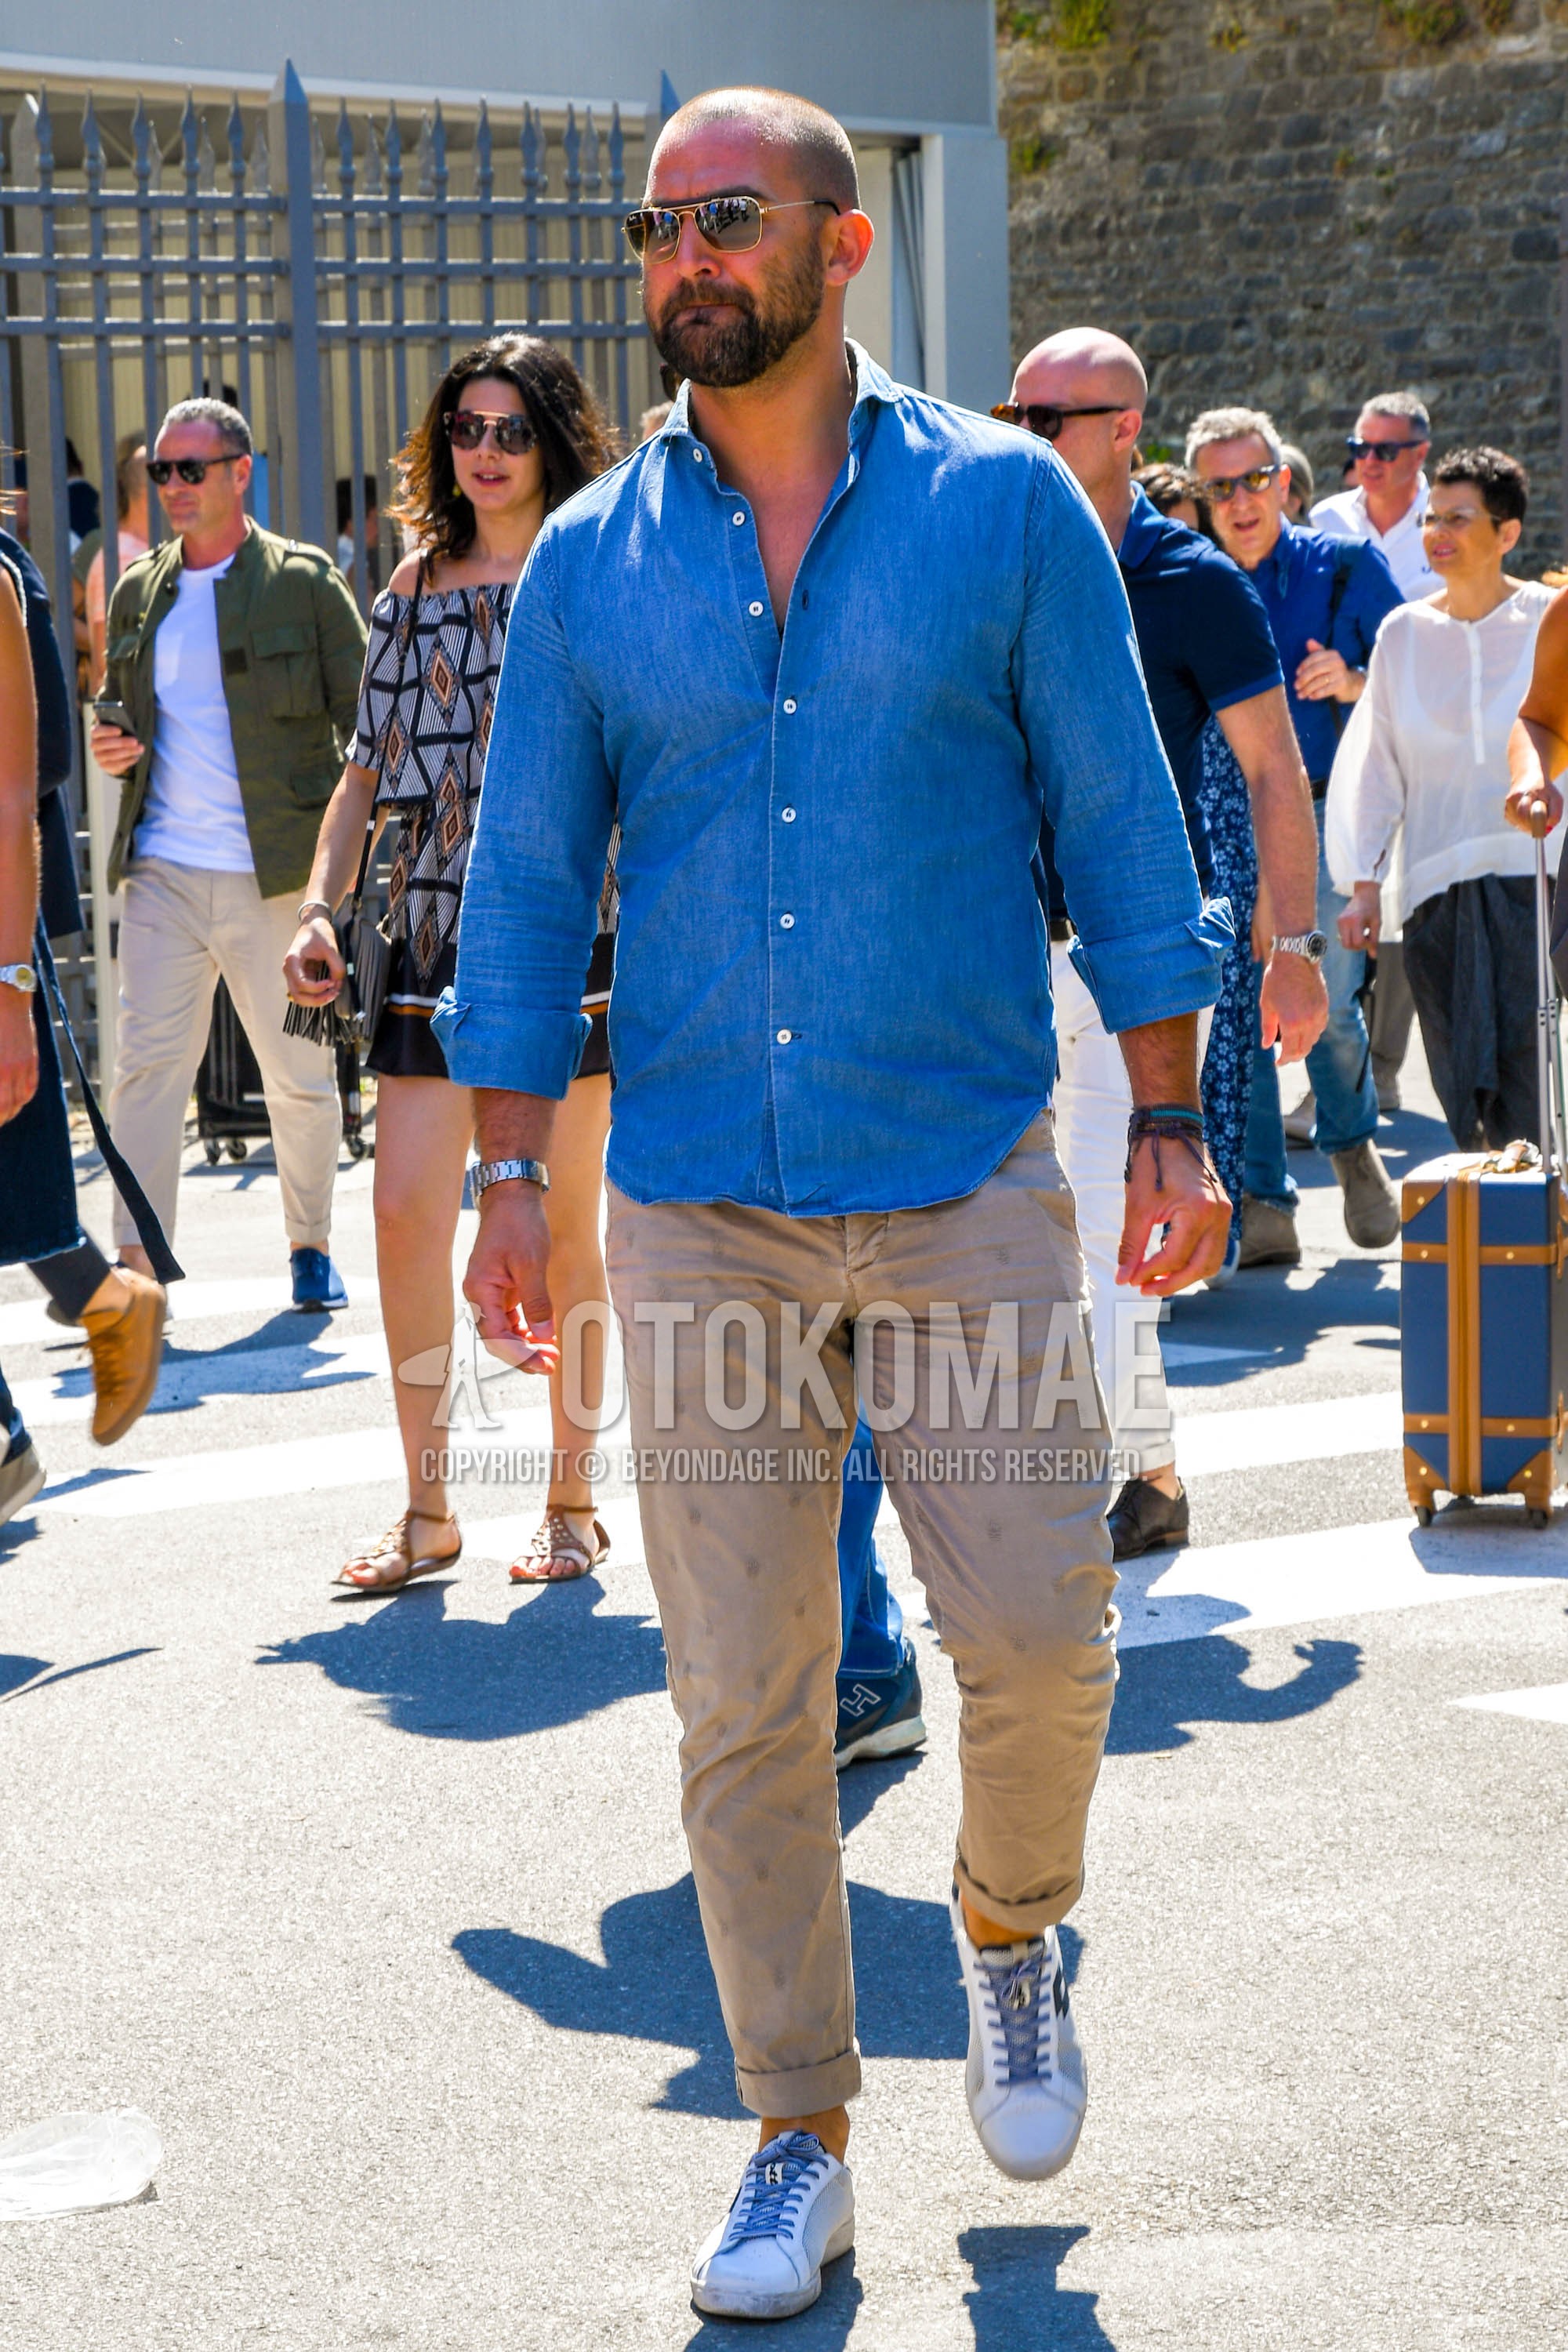 Men's spring summer outfit with plain sunglasses, blue plain denim shirt/chambray shirt, beige bottoms chinos, white low-cut sneakers.